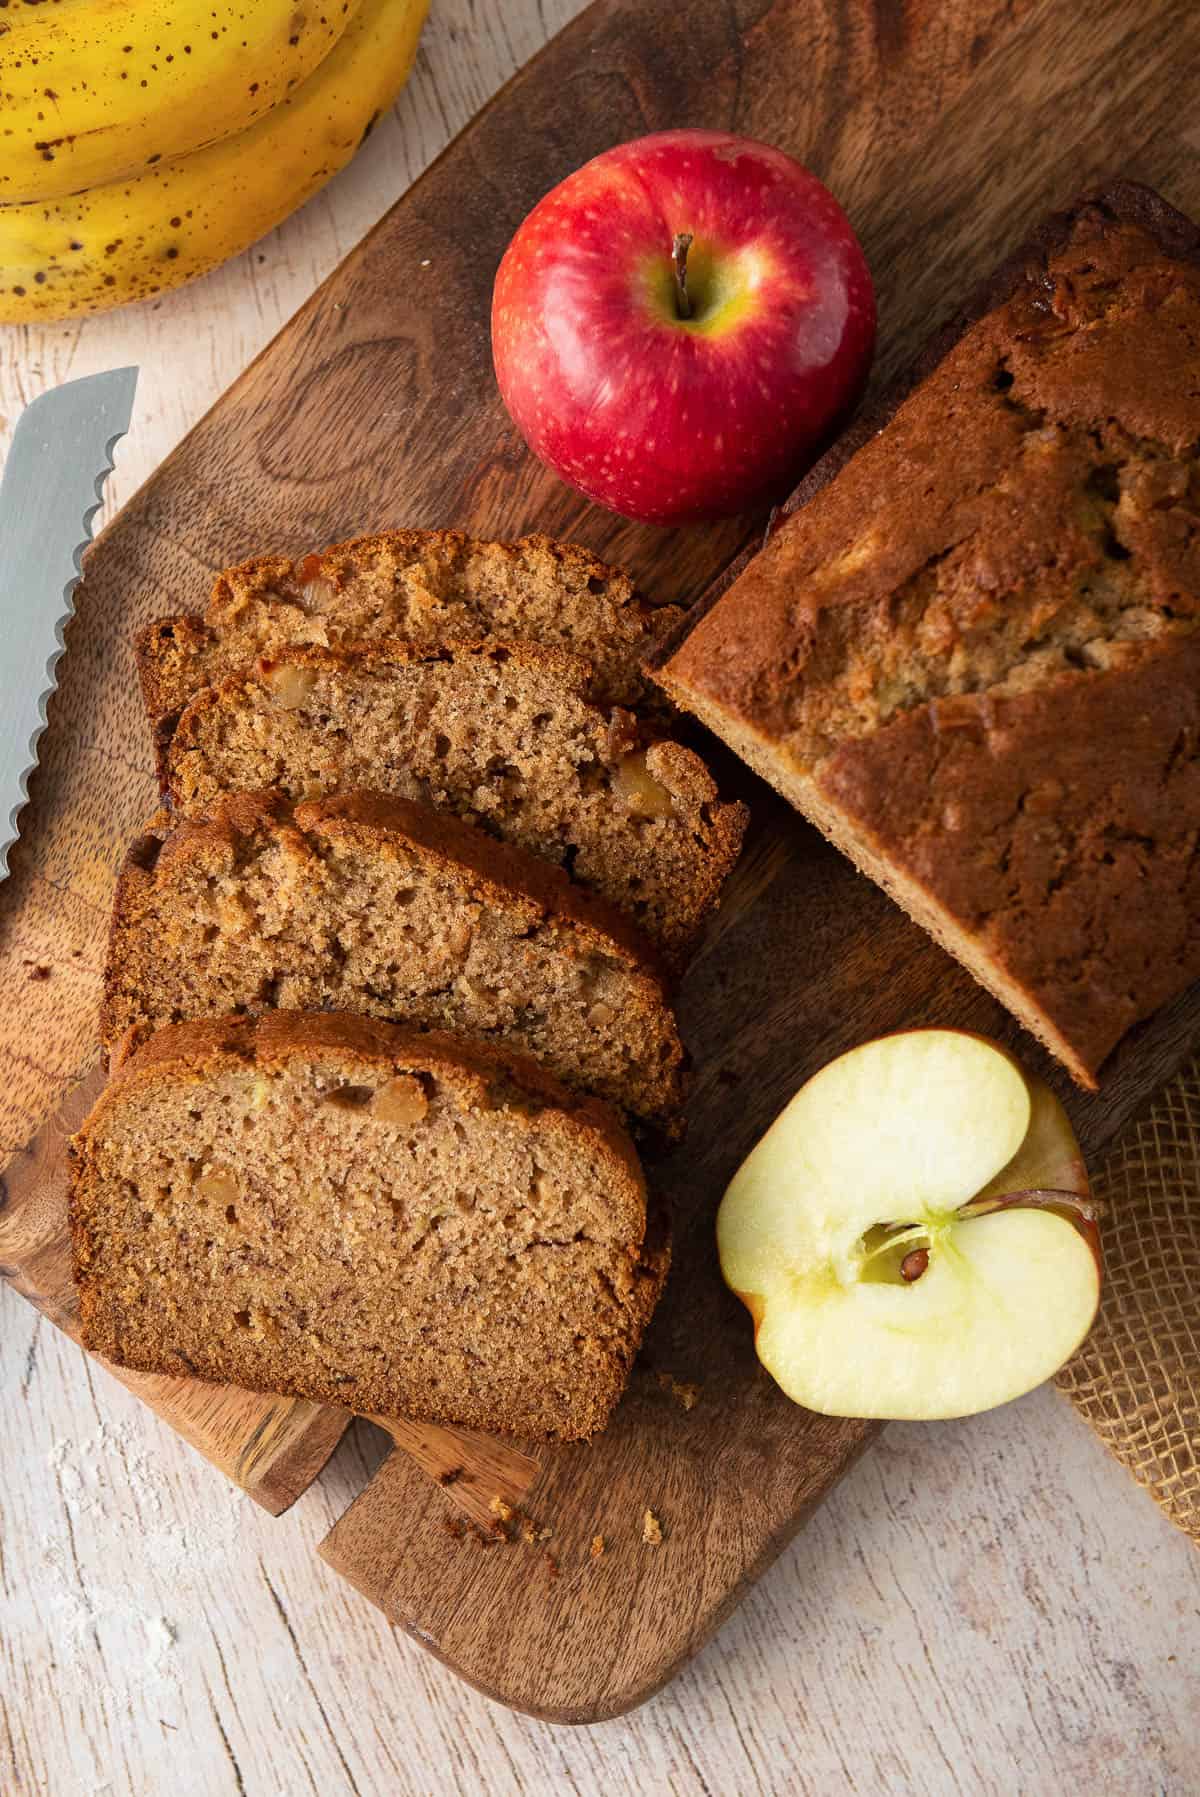 Slices of Apple Banana Bread on a cutting board with apples.